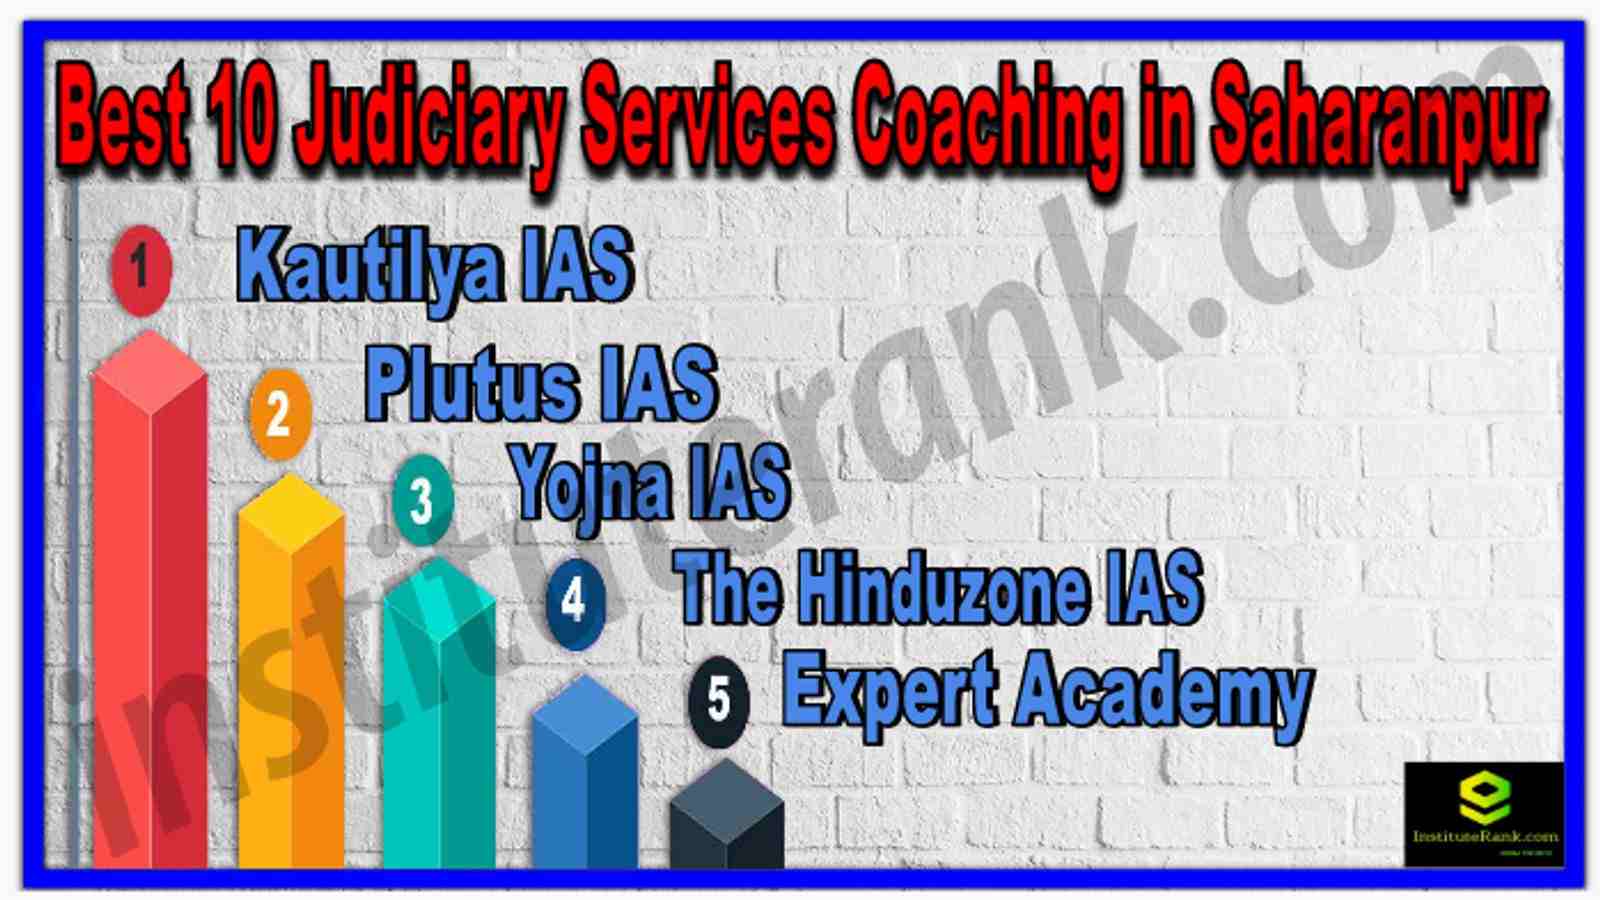 Best 10 Judiciary Services Coaching in Saharanpur